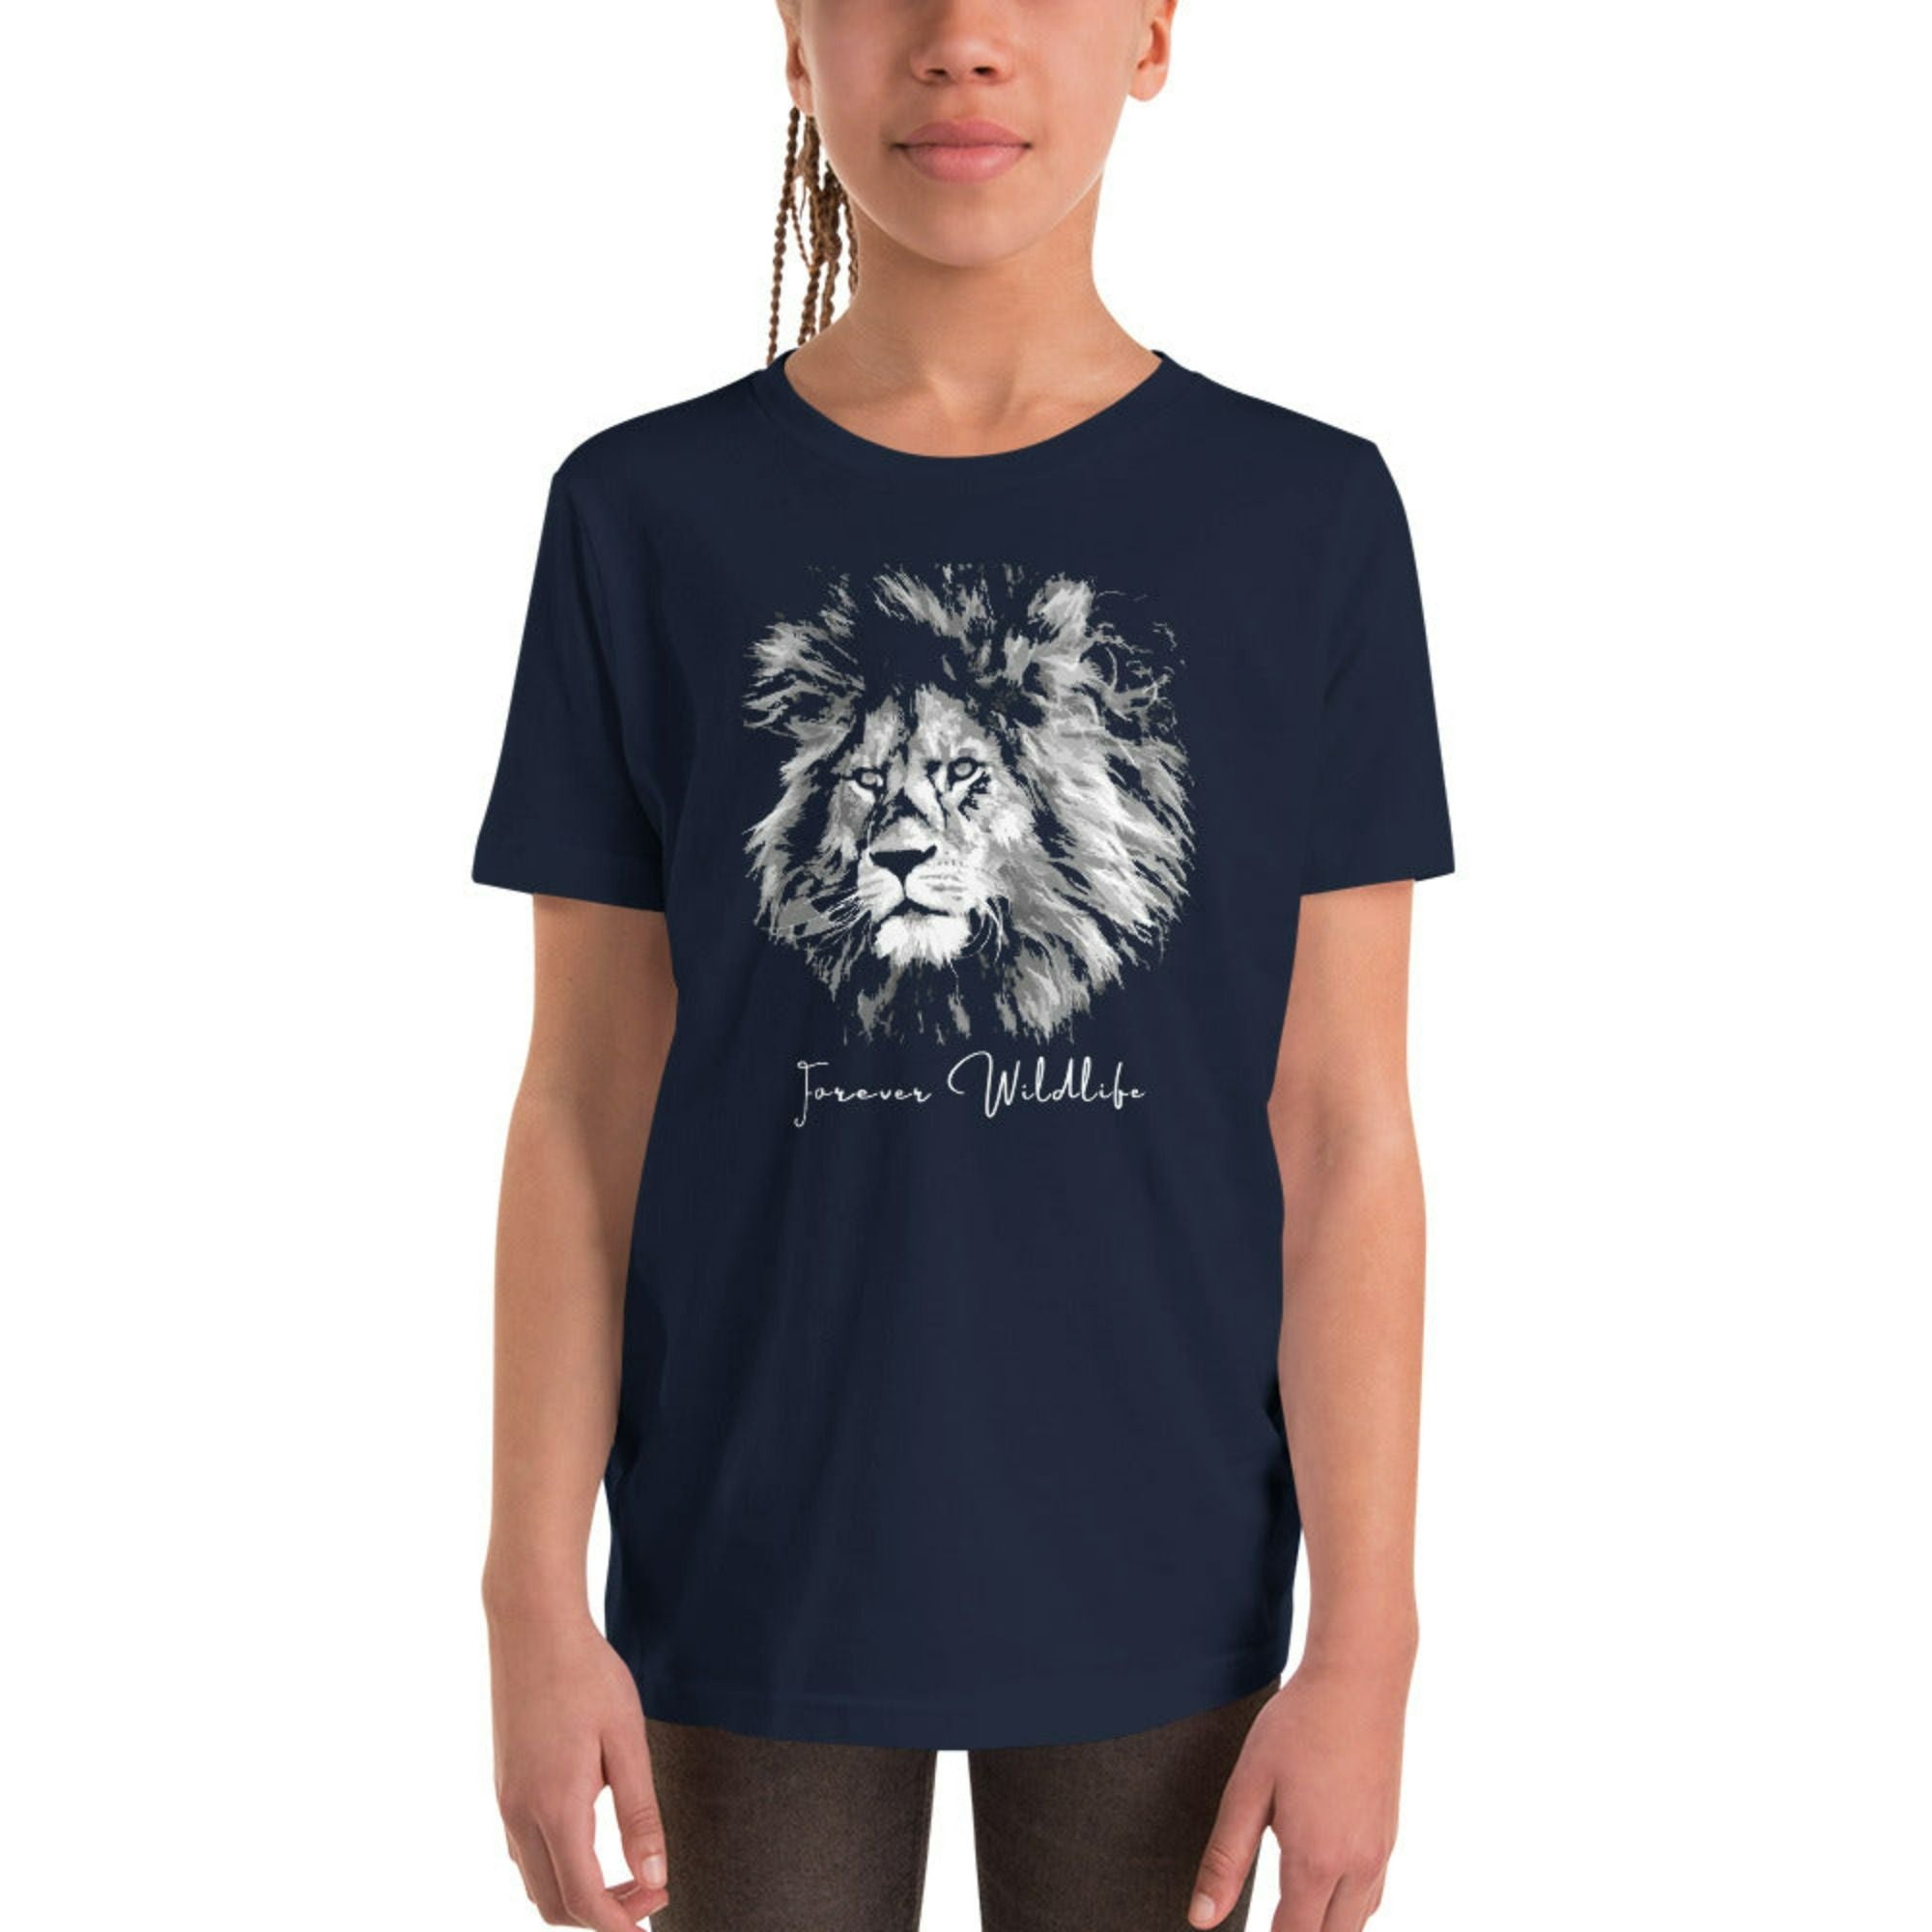 Teen wearing Navy Youth T-Shirt with lion graphic as part of Wildlife T Shirts, Wildlife Clothing & Apparel by Forever Wildlife